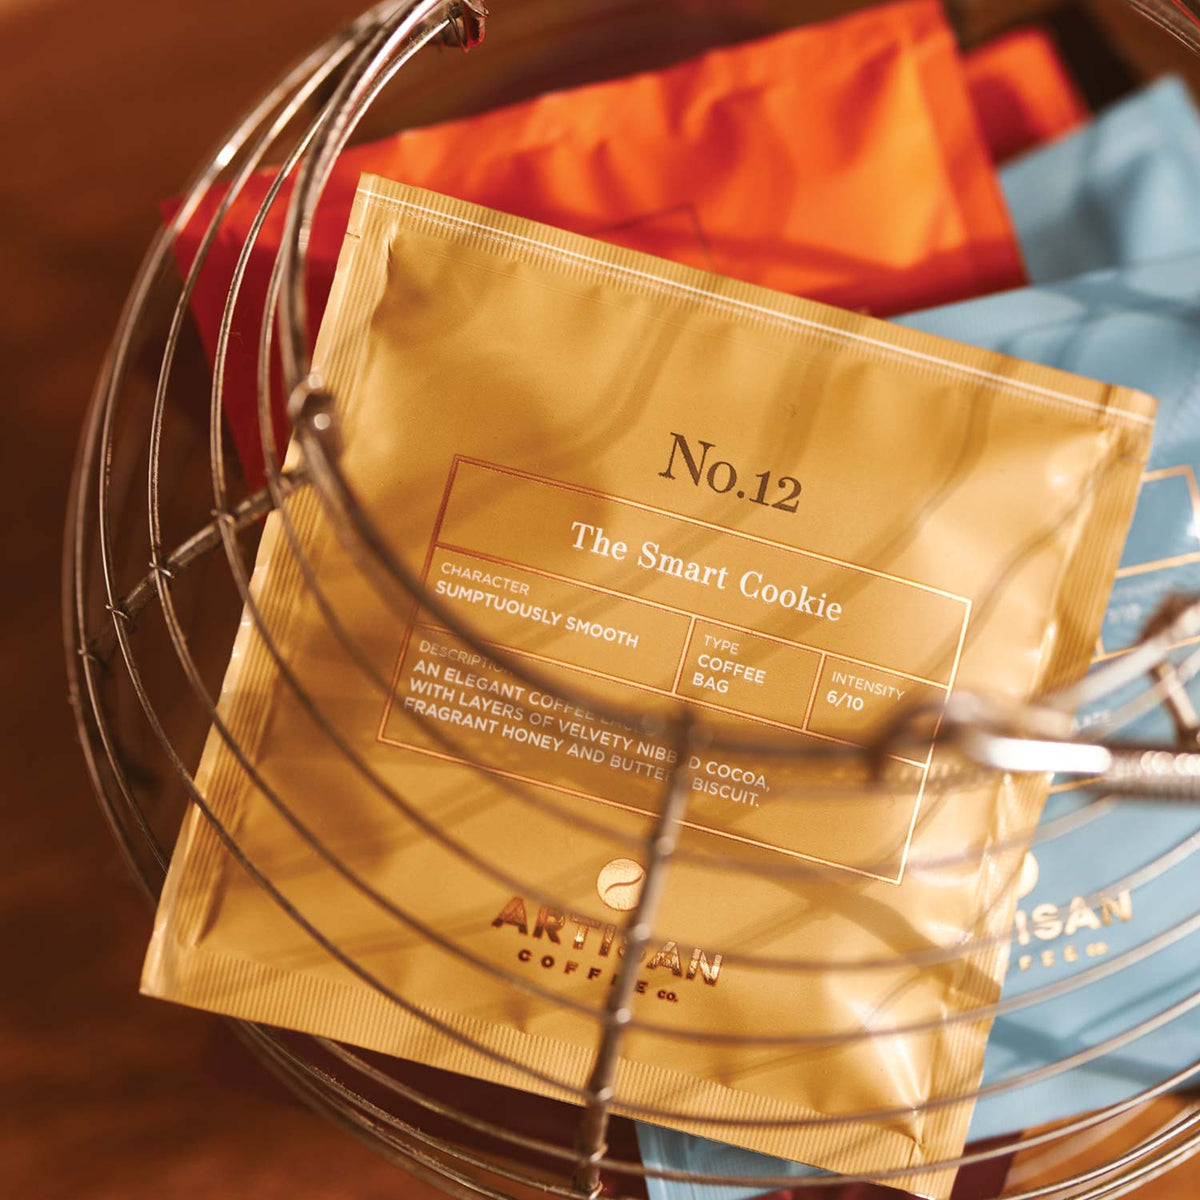 Artisan-coffee-co_The-smart-cookie_Coffee-bag_packaging_wire-basket